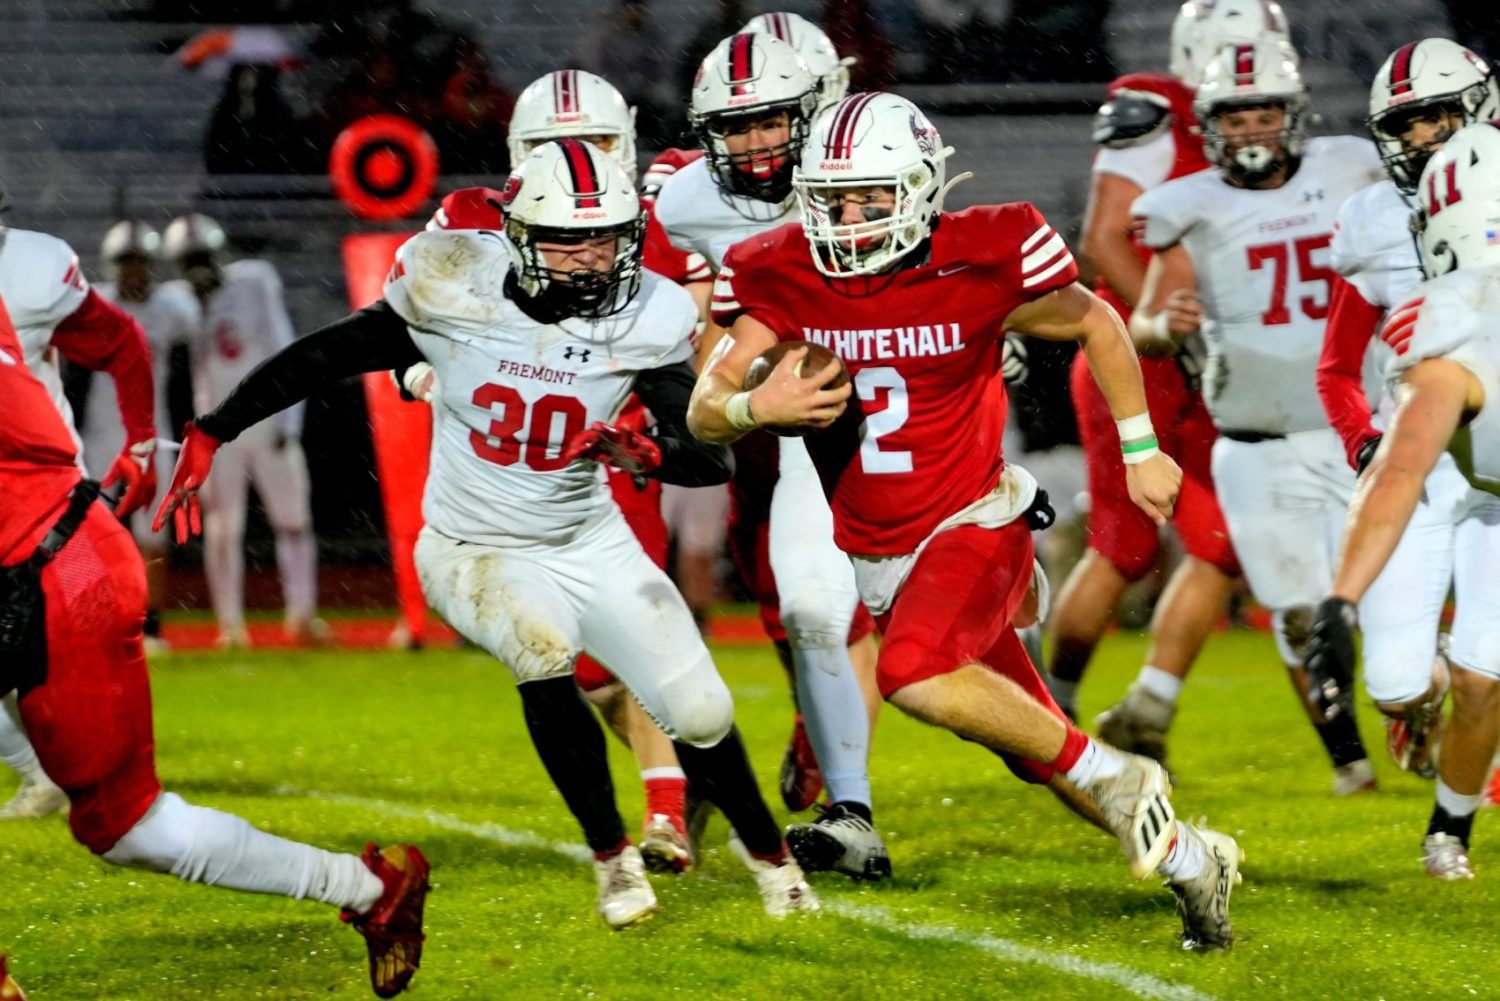 Whitehall’s defense chalks up fifth shutout of the season in rout of Fremont